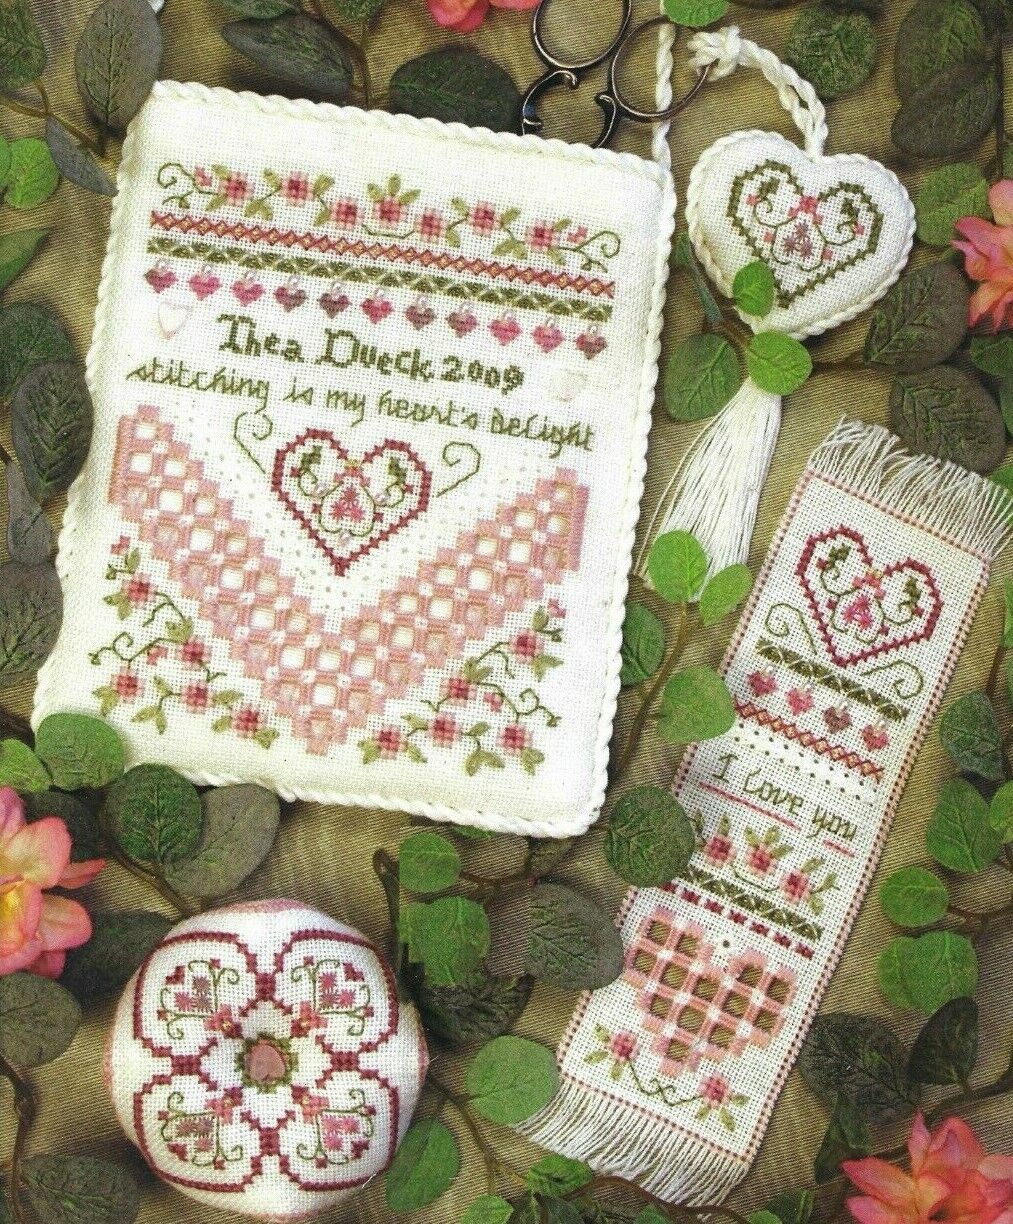 "Heart's Delight" THEA DUECK The Victoria Sampler Leaflet #TVS 195 ©2009 SMALLS